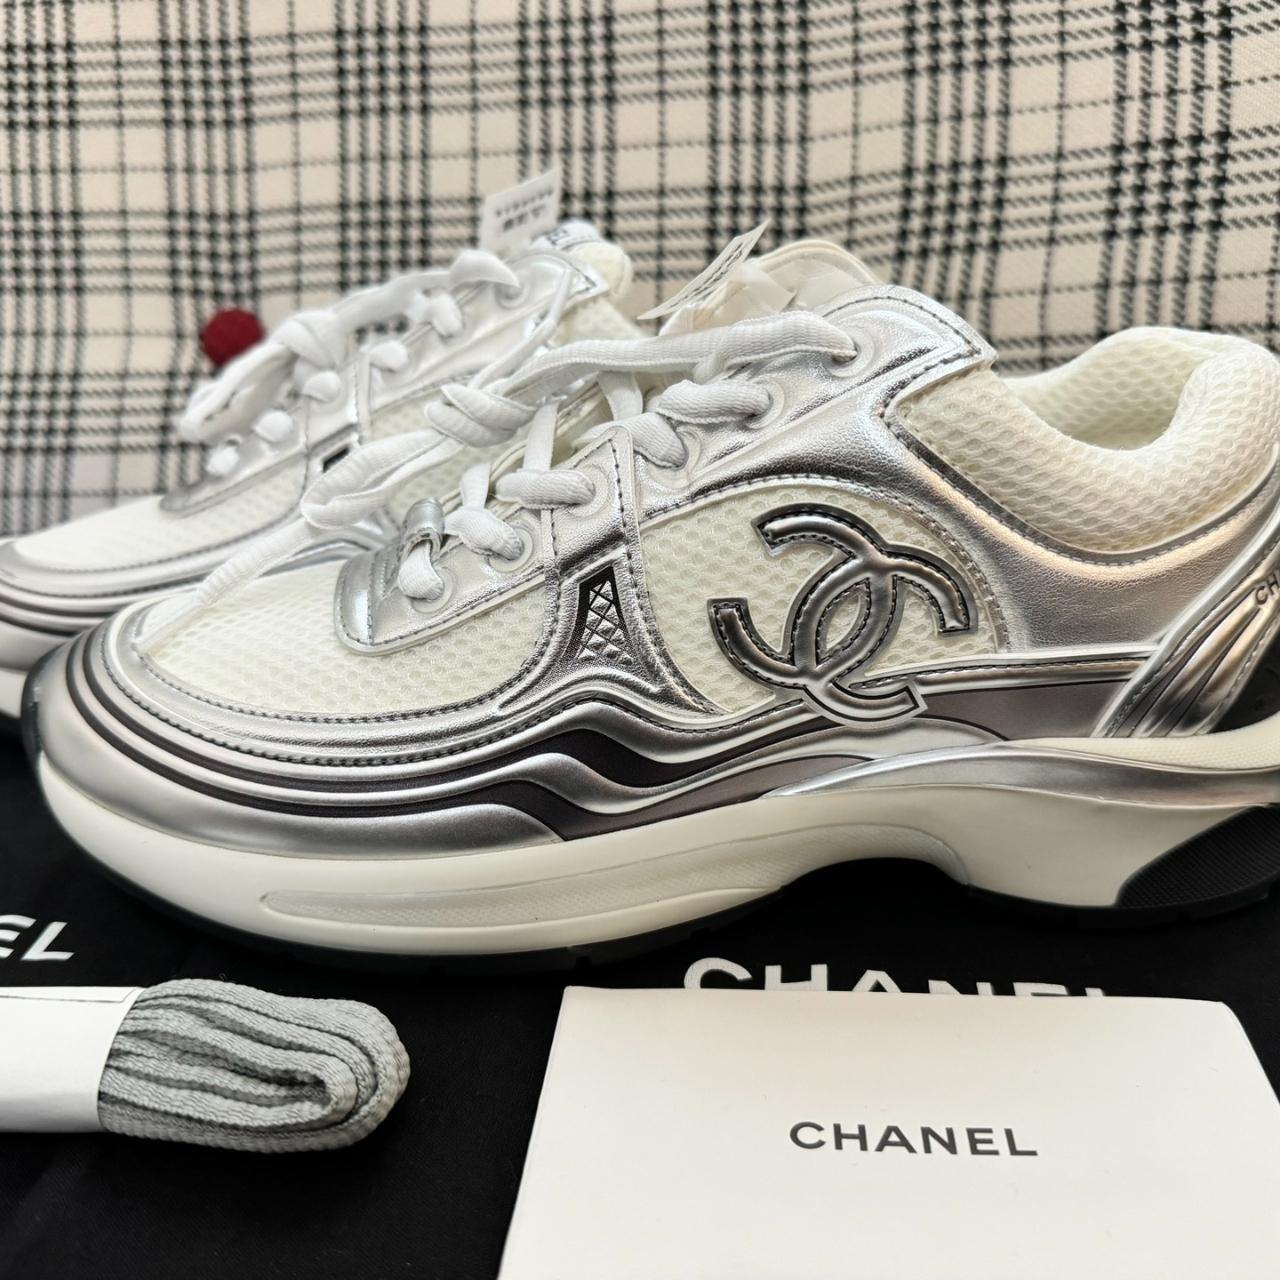 CHANEL | Shoes | Chanel Sneakers Size 7 Guc | Poshmark